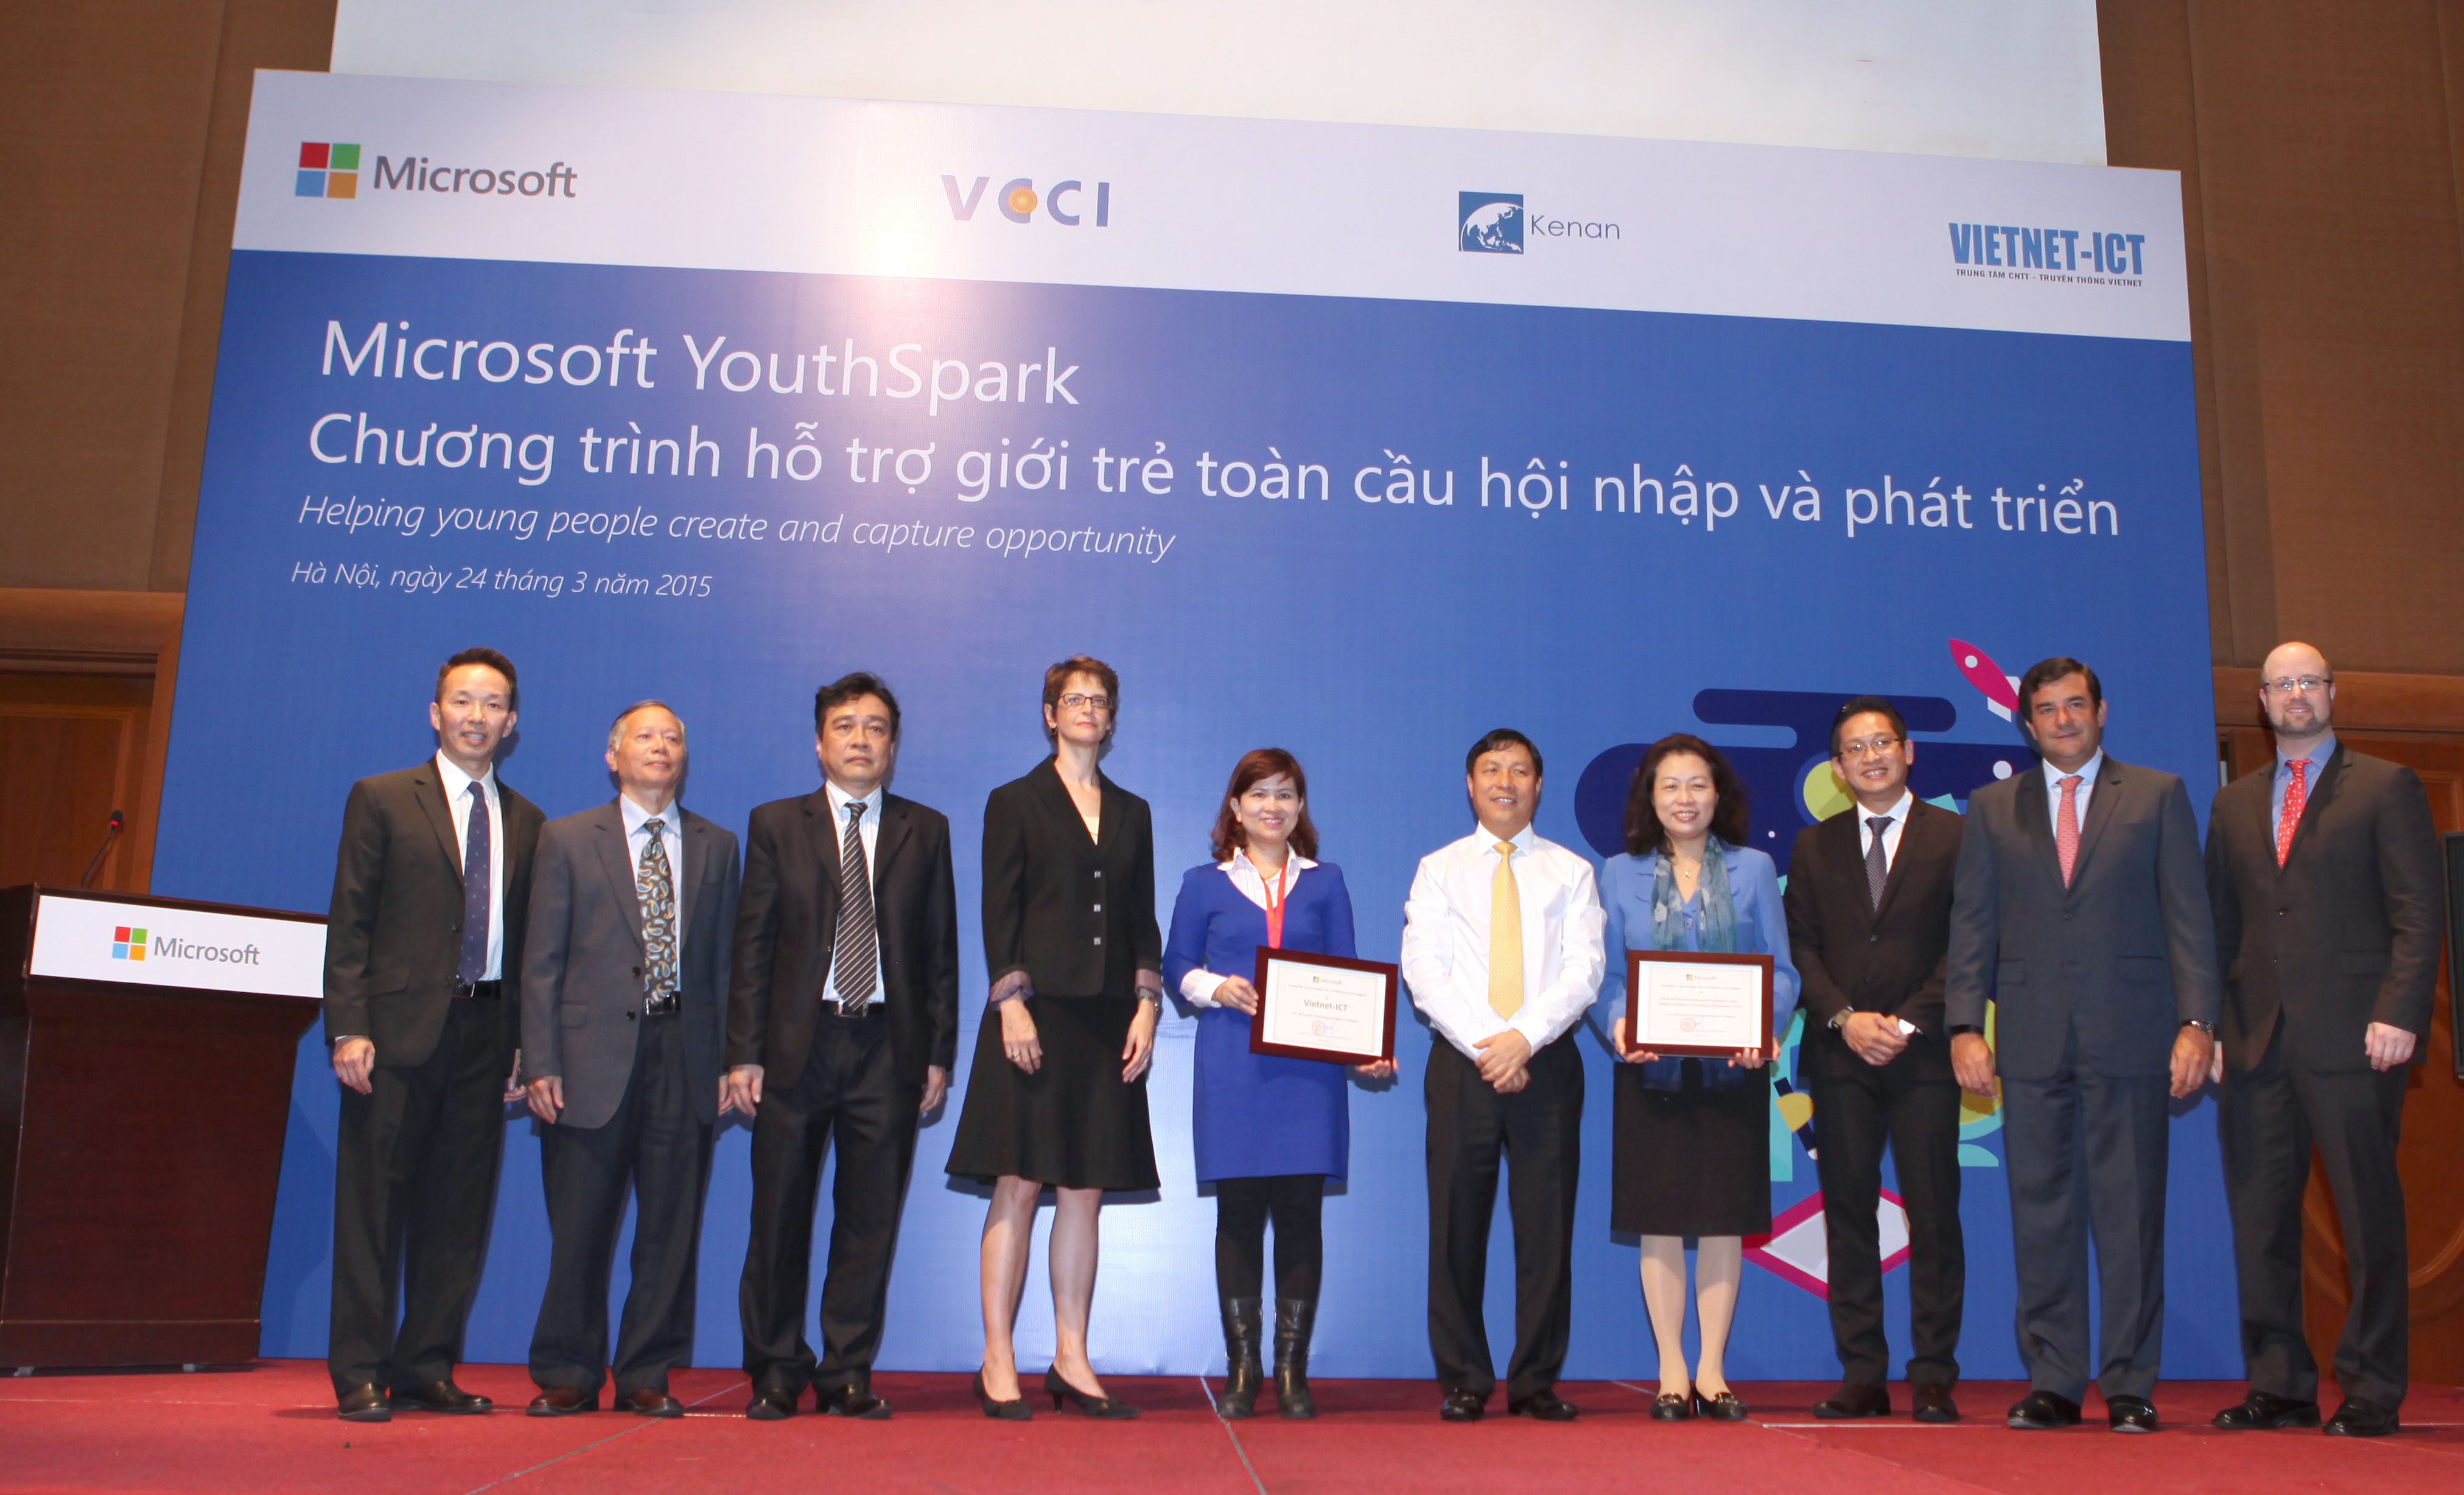 From left to right: Mr. Khoa Pham, Director of Legal and Corporate Affairs, Microsoft Vietnam; Mr. Phung Quang Huy, Director of Gender Office, VCCI; Mr. Pham Hoang Tien, Director of SMB, VCCI; Ms. Laura Stone, Economic Counselor, US Embassy Hanoi; Ms. Nguyen Thu Hue, Founder and Executive Director, Vietnet-ICT; Mr. Dang Huy Dong, Vietnam Deputy Minister for Planning and Investment; Ms. Pham Thi Thu Hang, General Secretary of VCCI; Mr. Vu Minh Tri, General Director of Microsoft Vietnam; Mr. César Cernuda, President of Microsoft Asia Pacific; Mr. Adam Sitkoff, Executive Director, AmCham Vietnam in Hanoi.